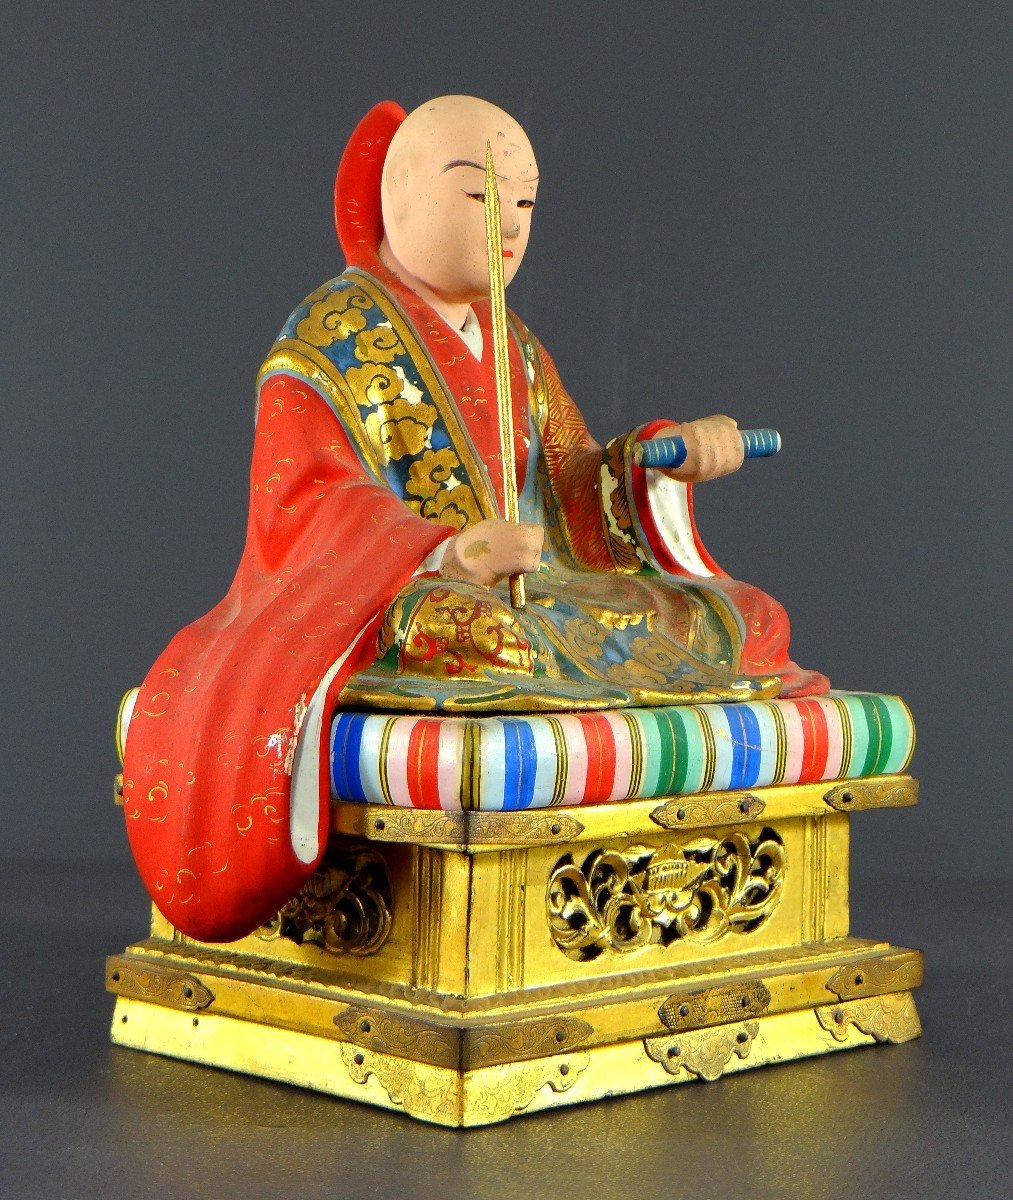 Japan, Early 20th Century, Wooden And Polychrome Plaster Statue Of The Monk Nichiren Shonin.-photo-3